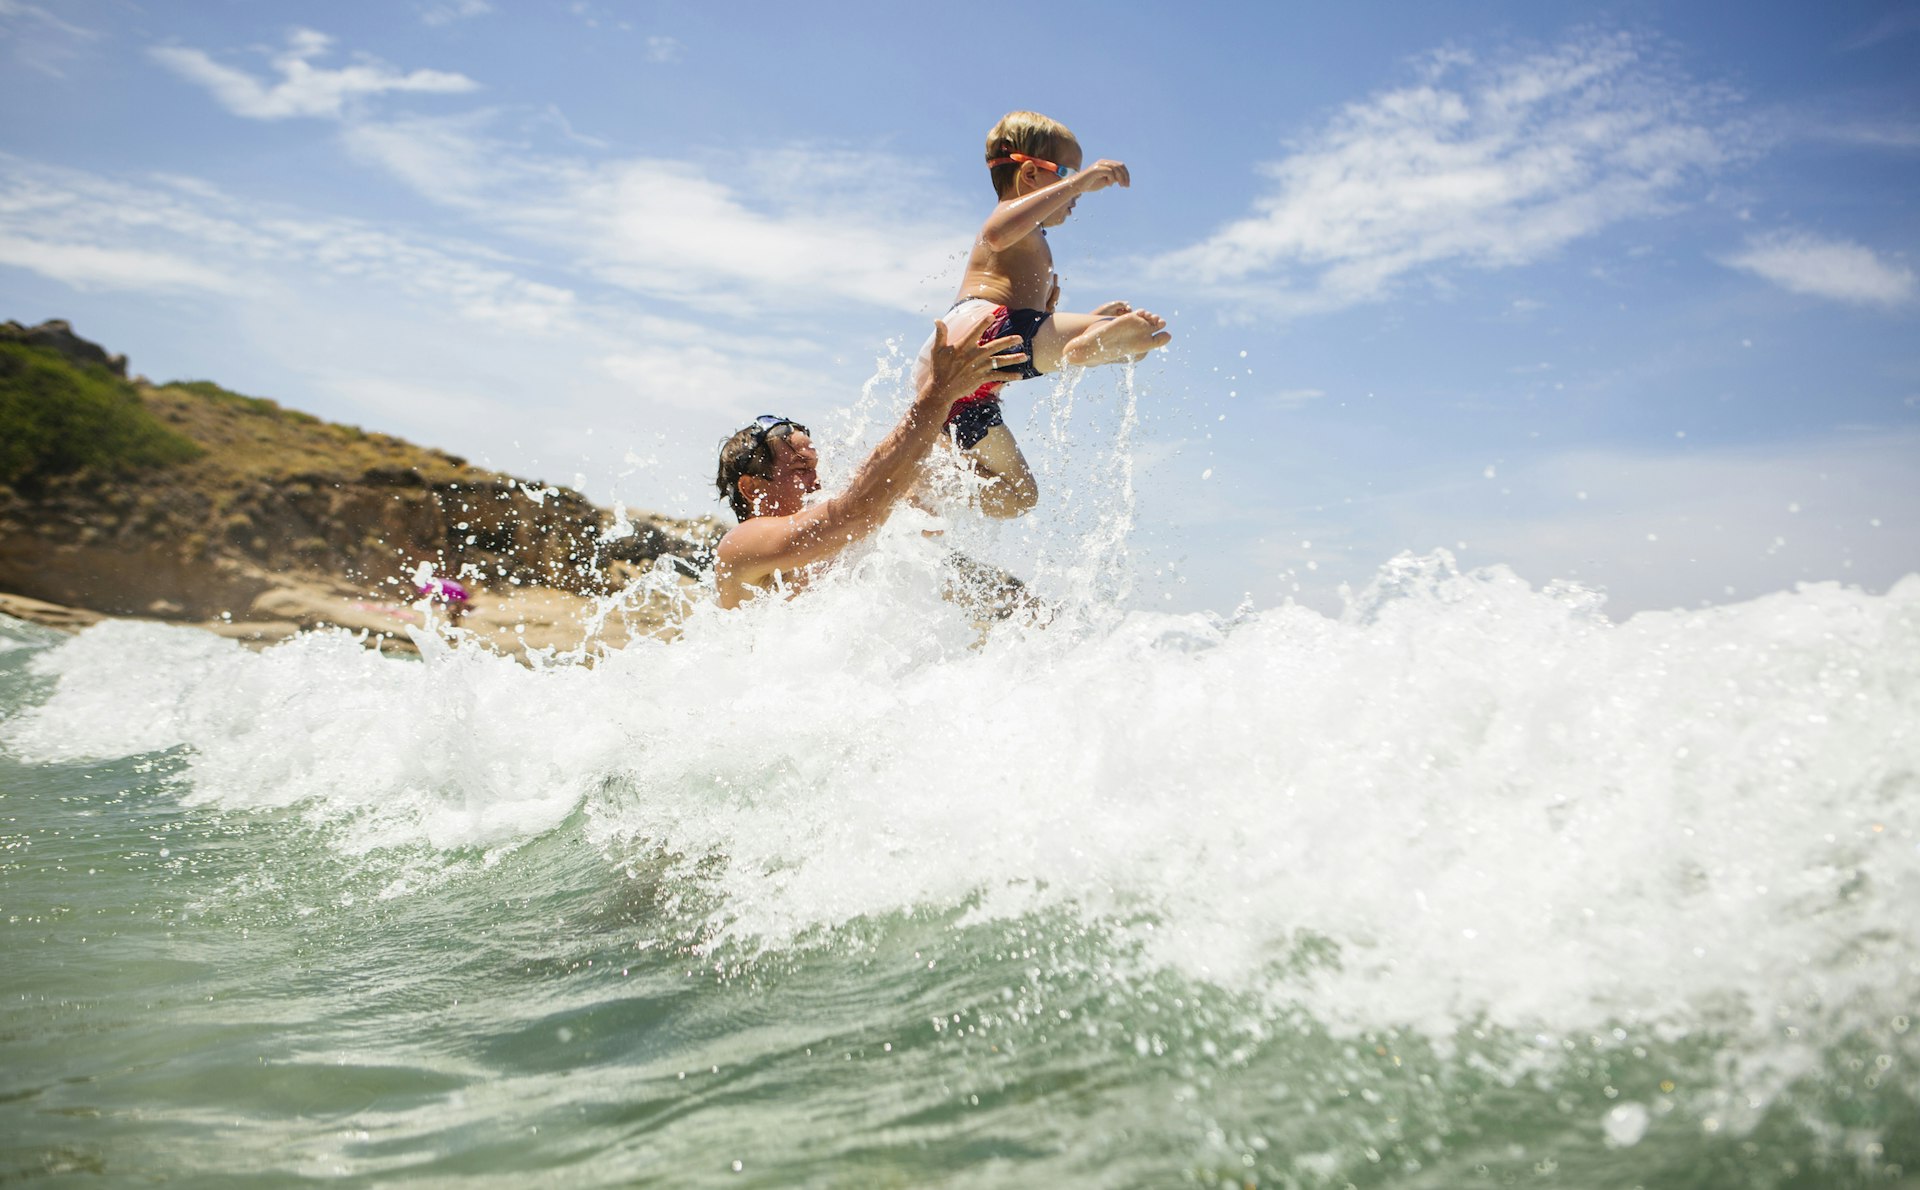 A man lifts a small child over the waves at the beach in Calvi, Corsica